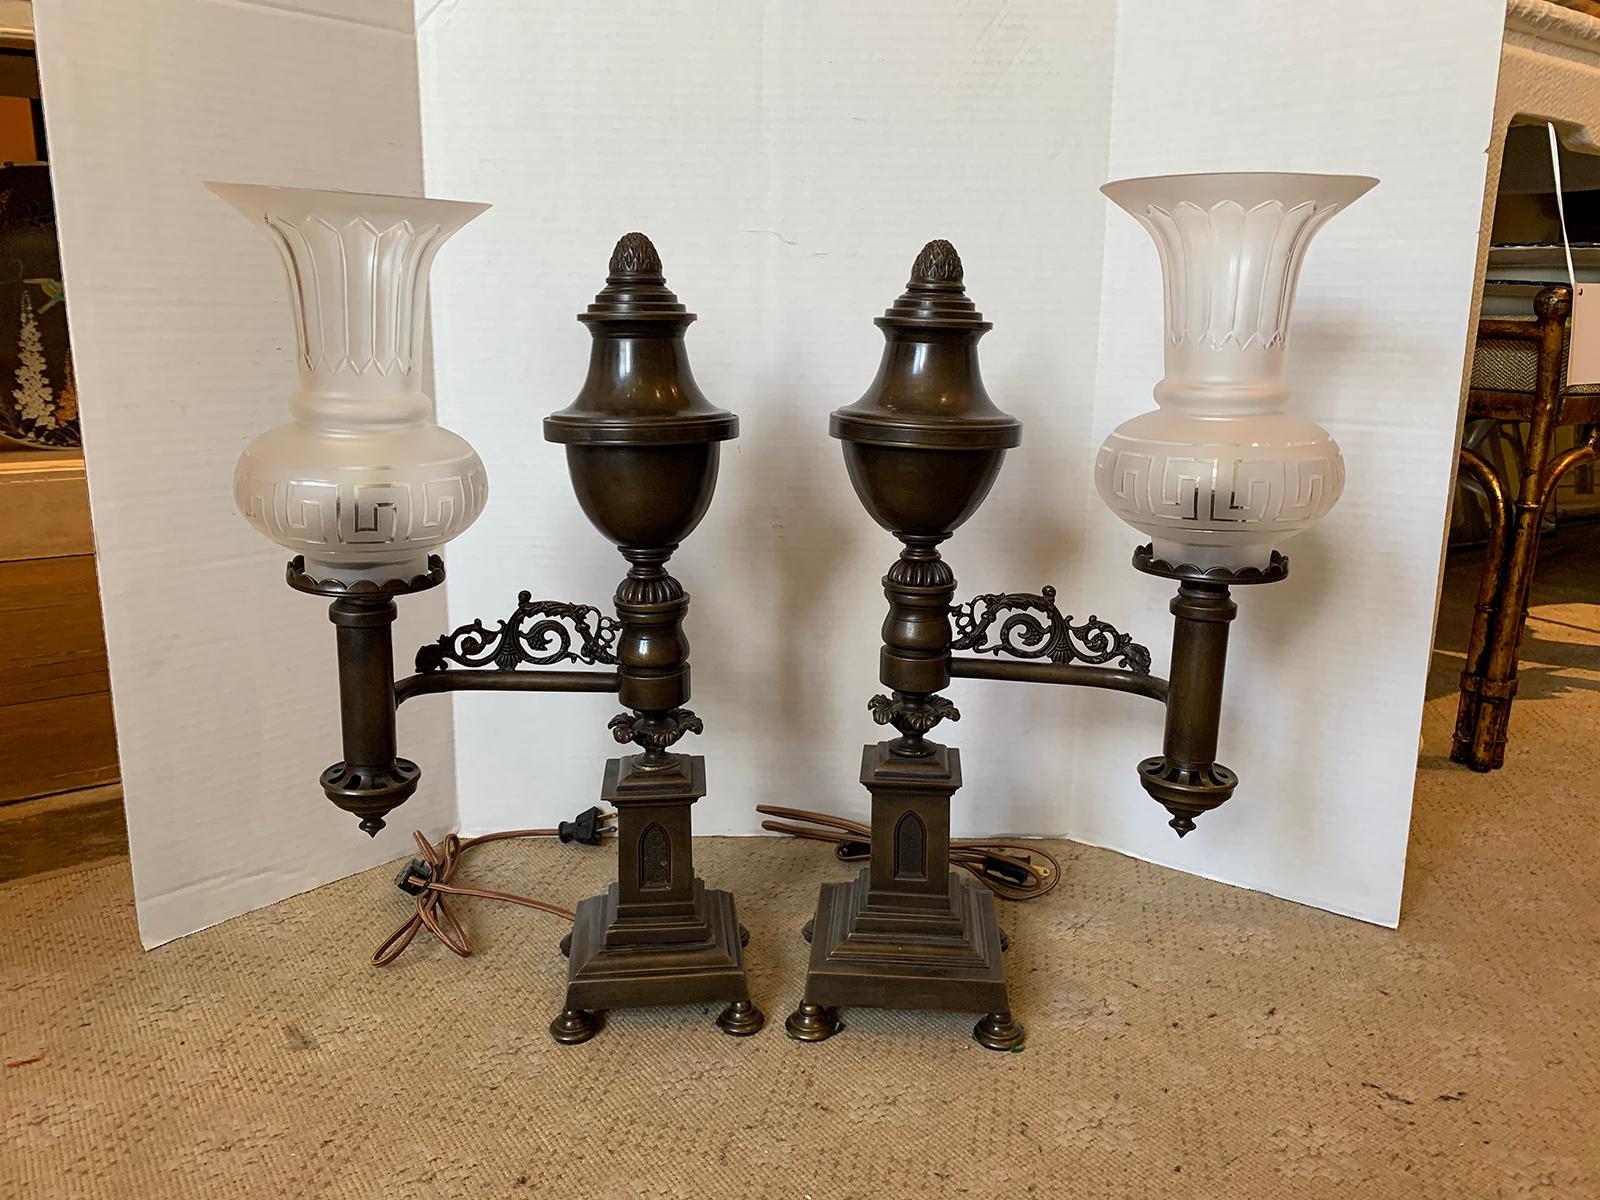 Pair of 19th-20th century bronze argand lamps with frosted crystal globes and acorn finials
New wiring.
Measures: Overall 11.25